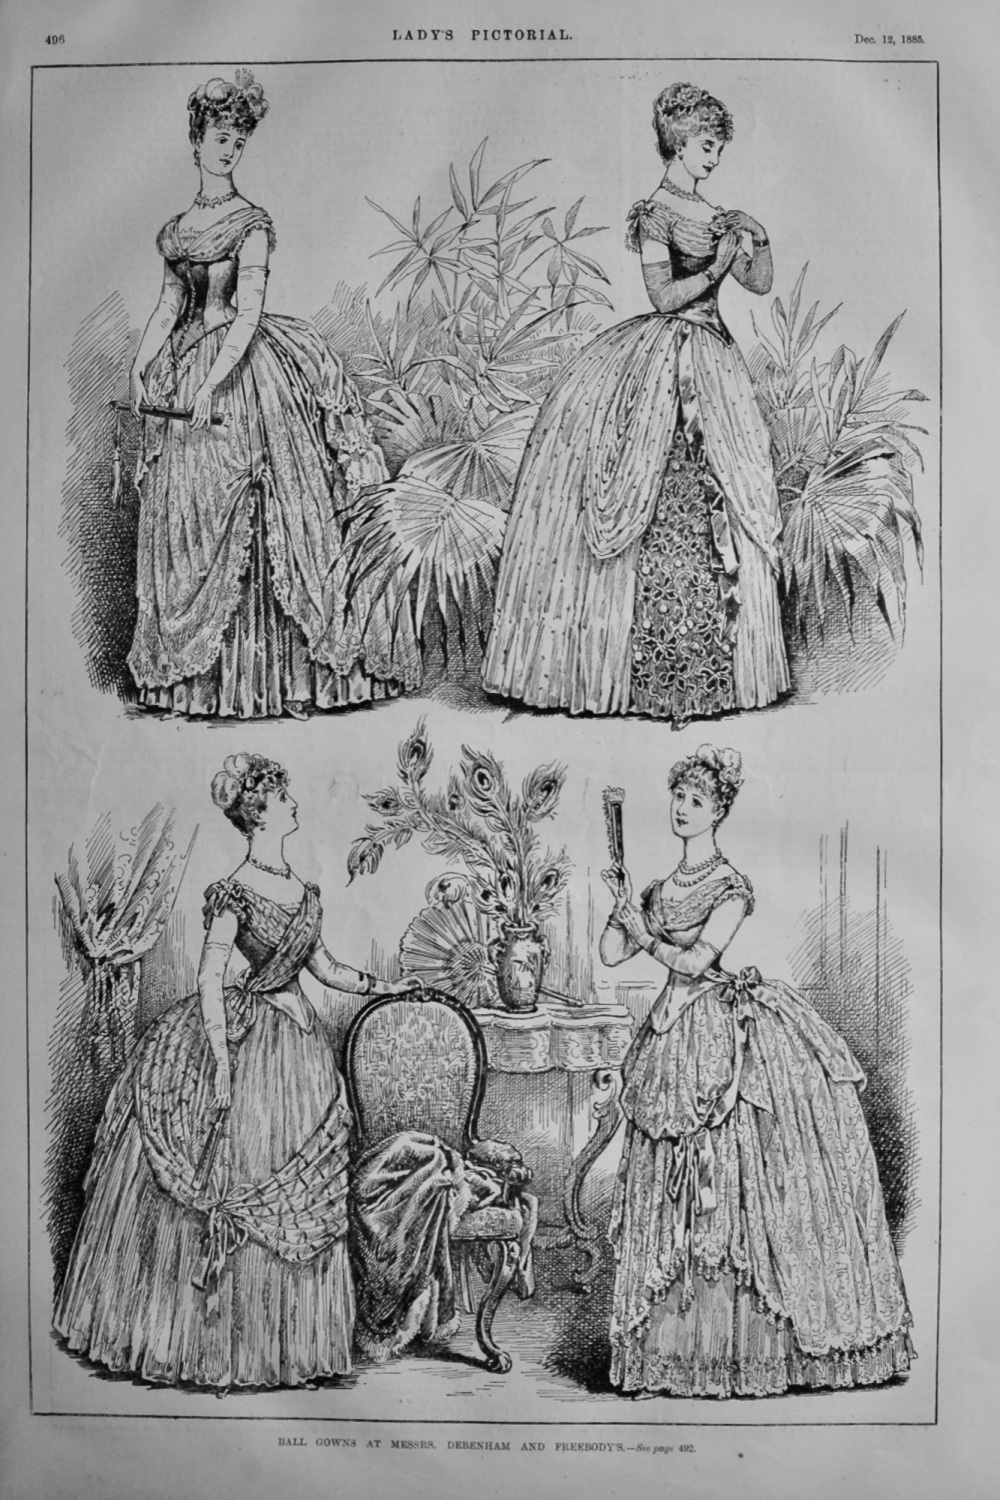 Ball Gowns at Messrs. Debenham and Freebody's.  1885.